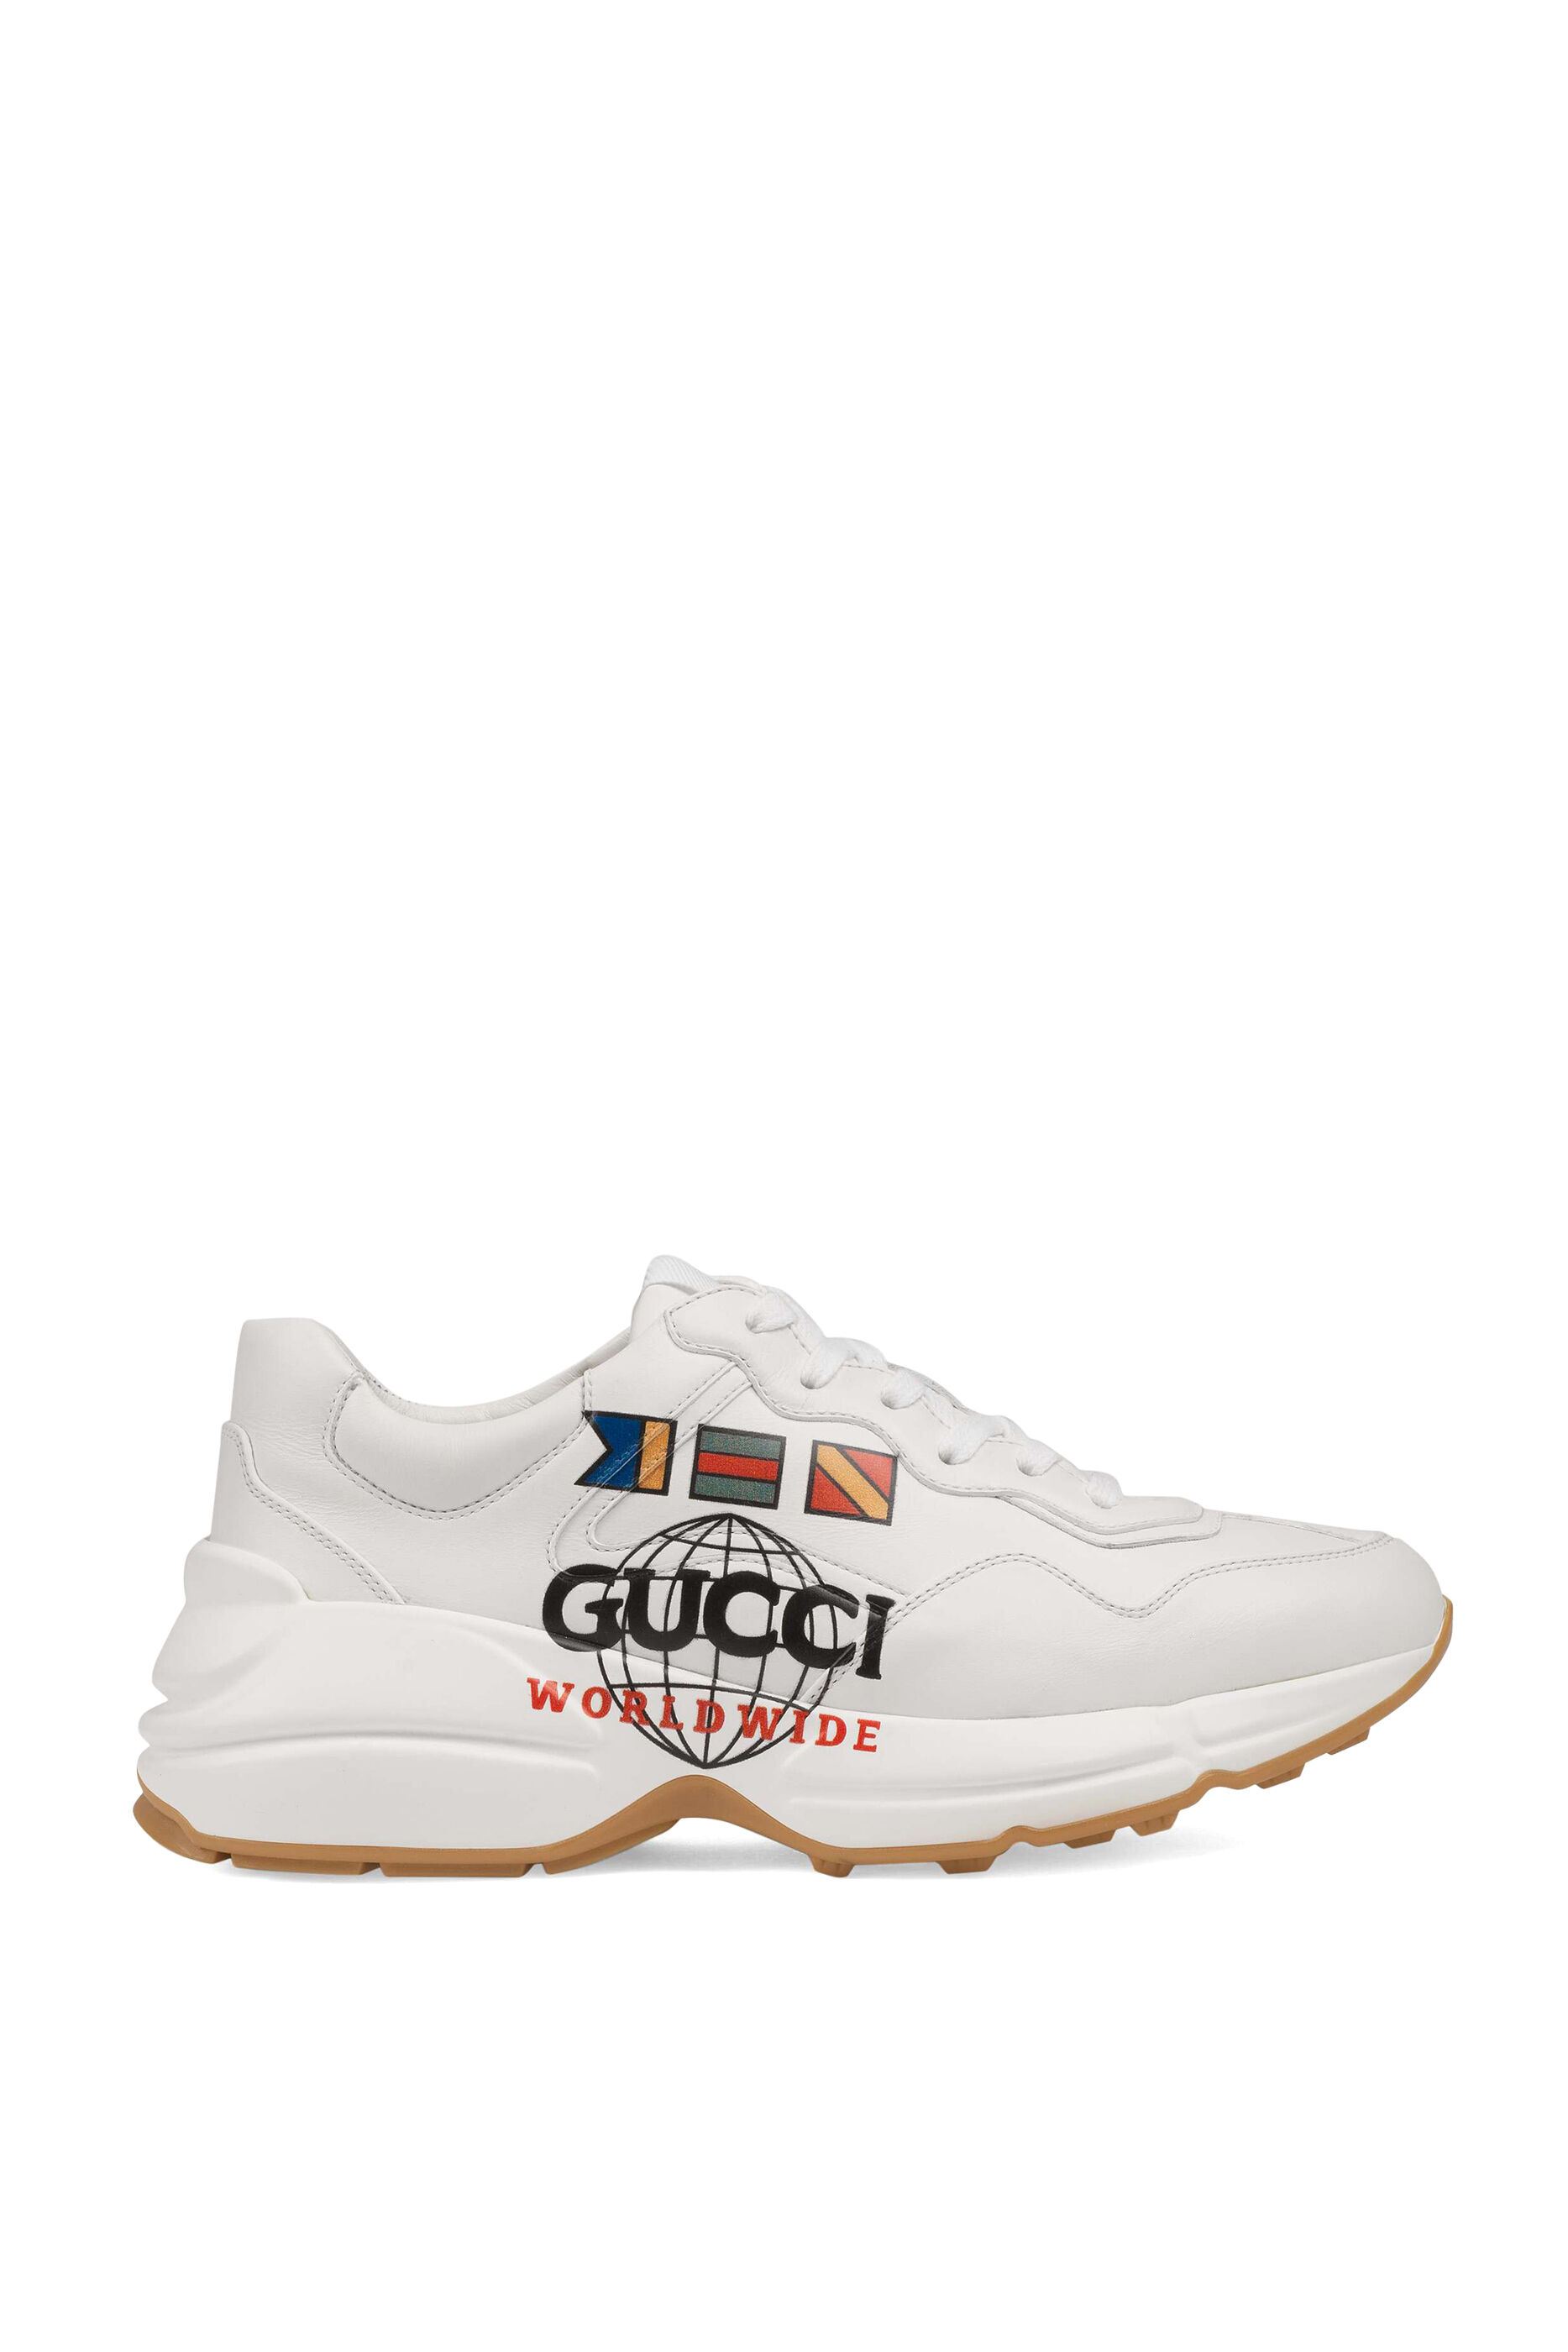 gucci running shoes womens